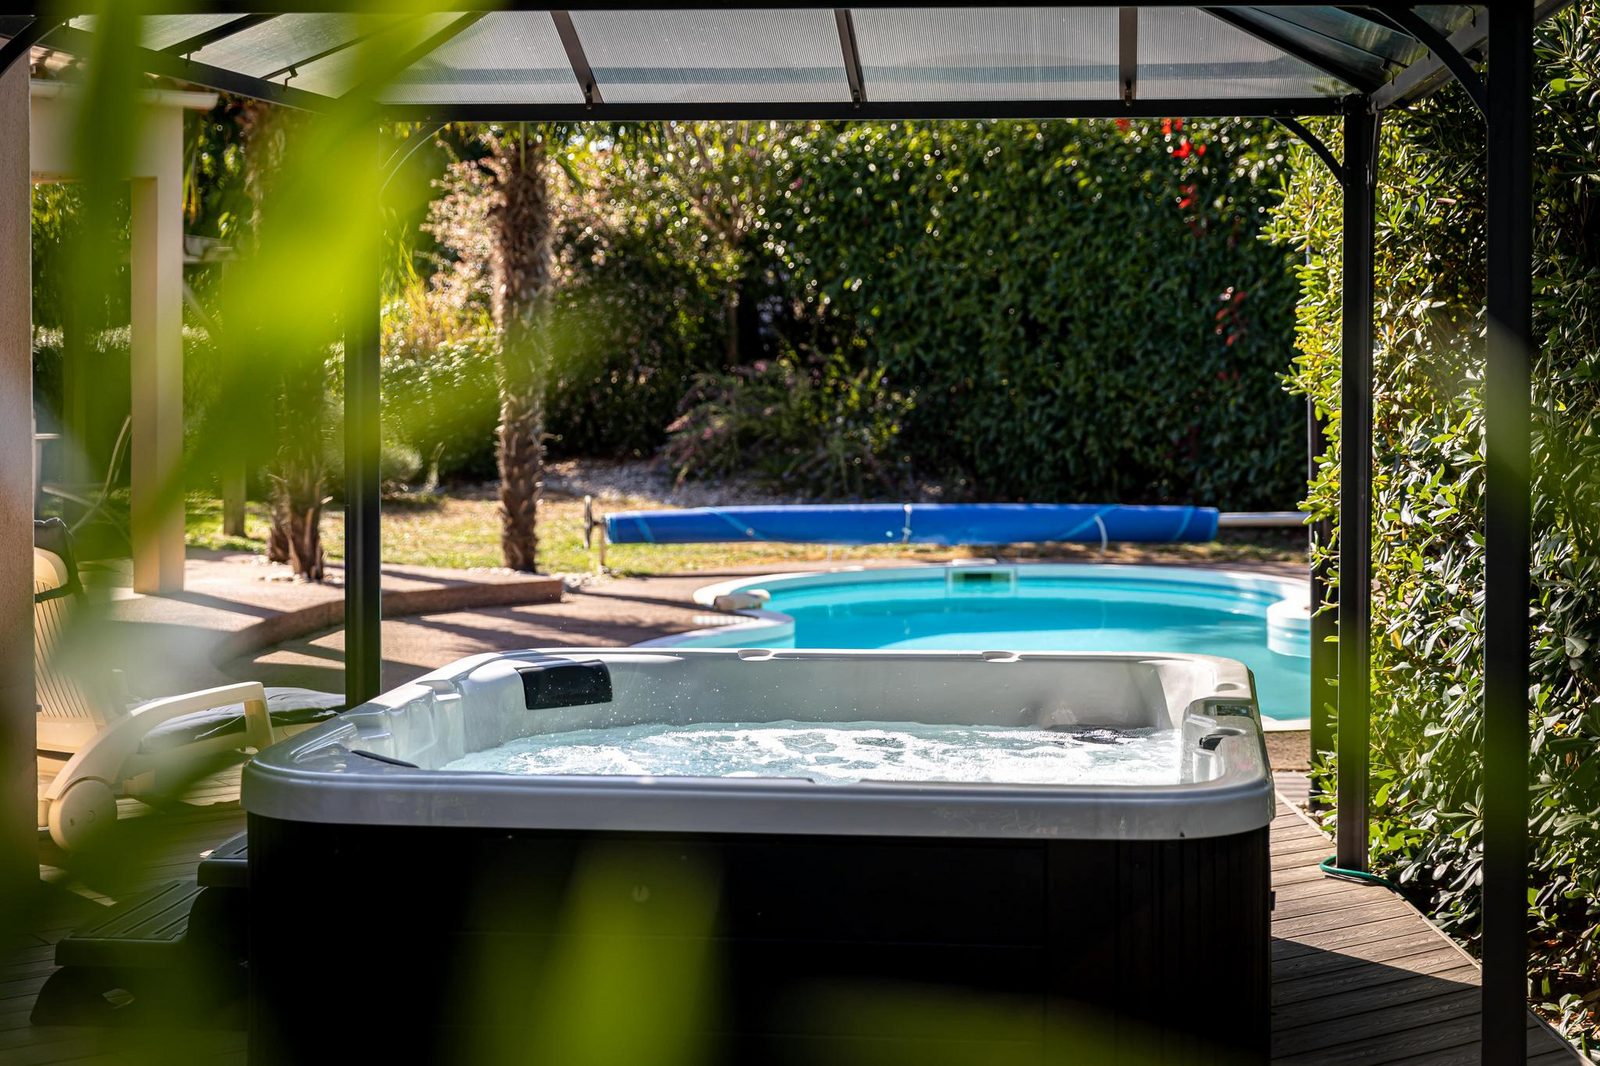 Acacia 6 with pool and jacuzzi